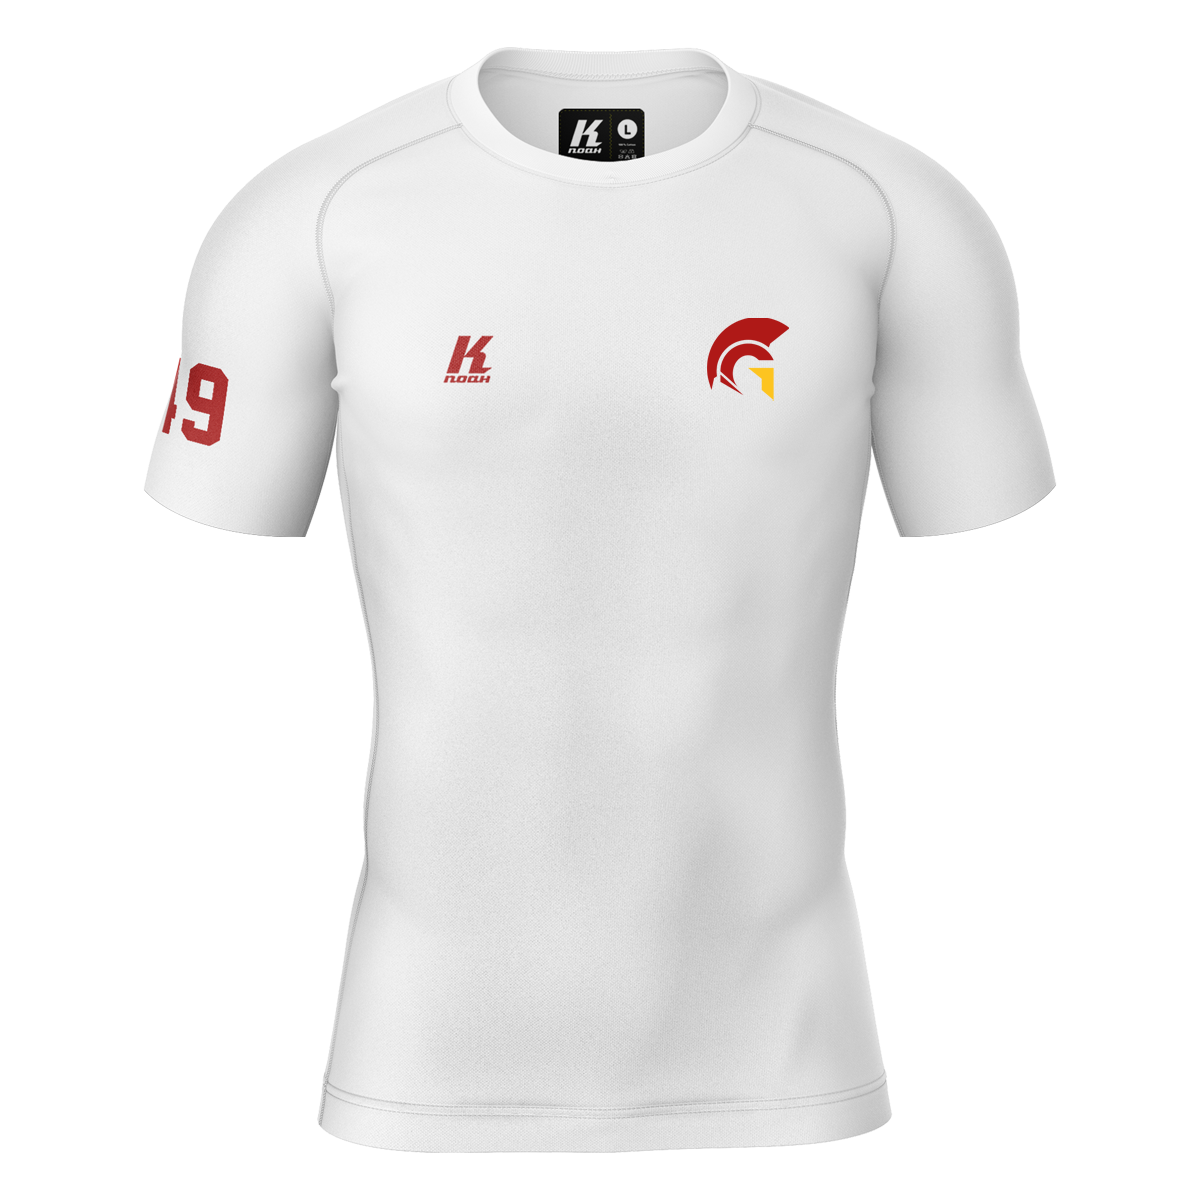 Gladiators K.Tech Compression Shortsleeve Shirt white with Playernumber/Initials